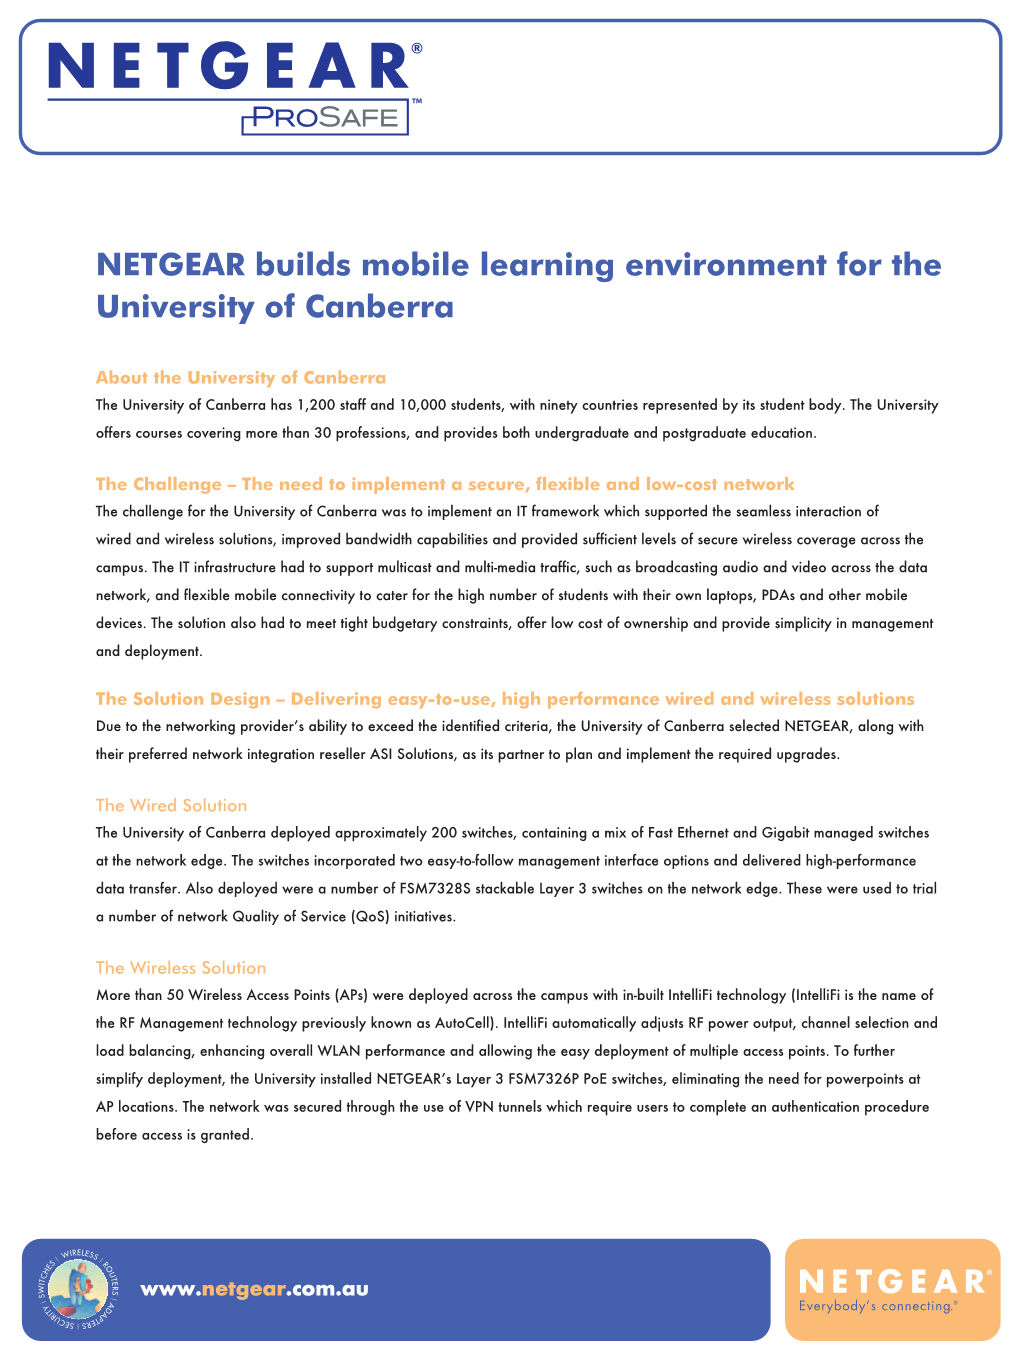 NETGEAR Builds Mobile Learning Environment for the University of Canberra